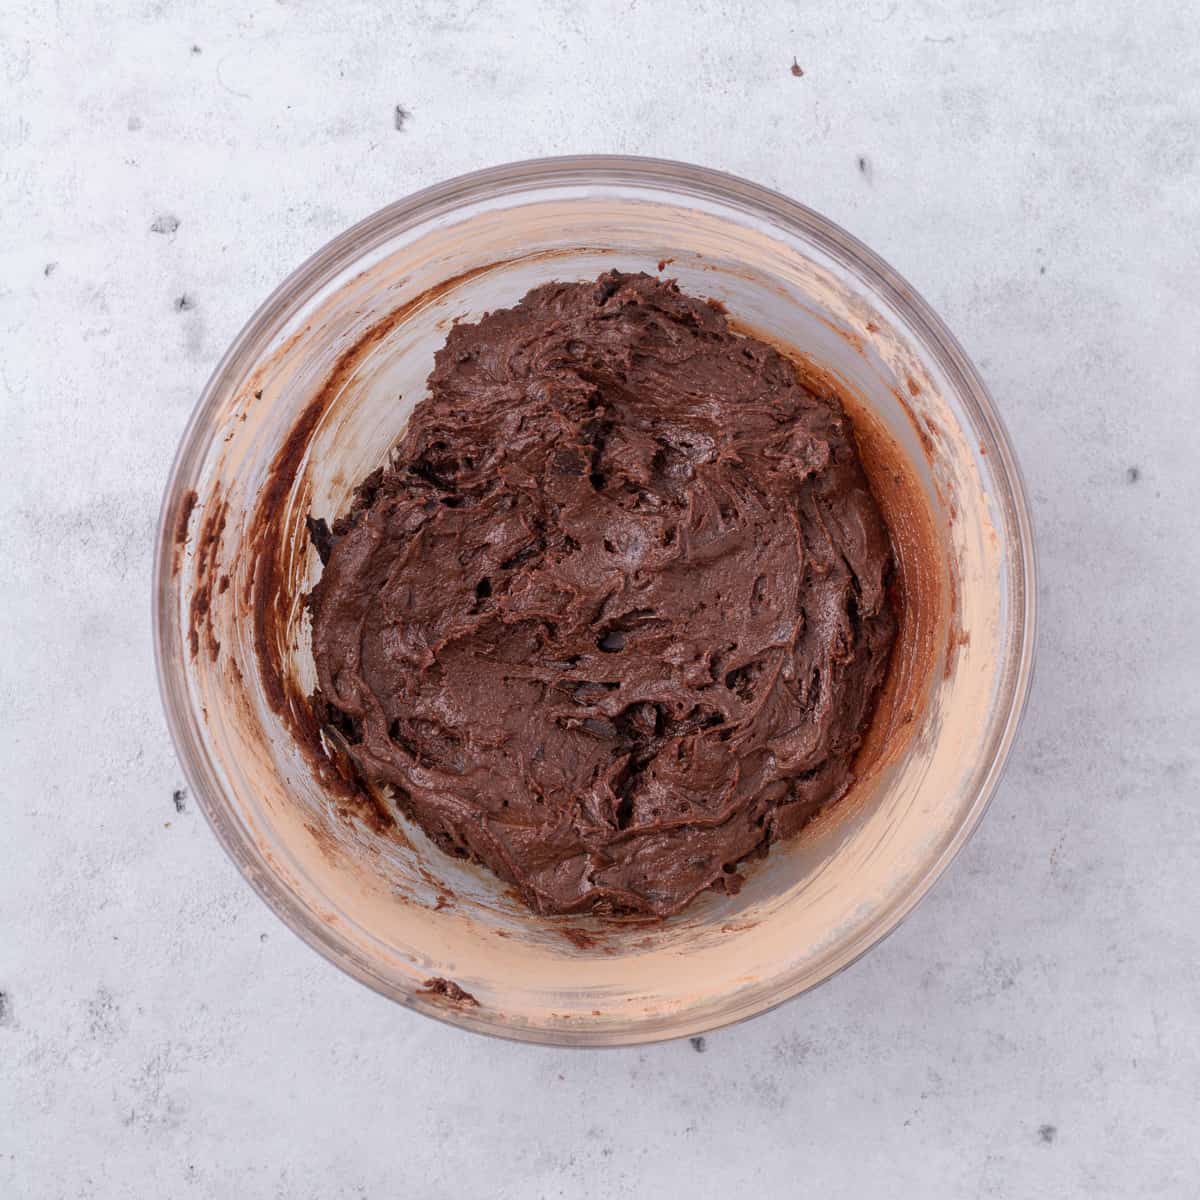 the completed brownie batter in a glass bowl on a grey background